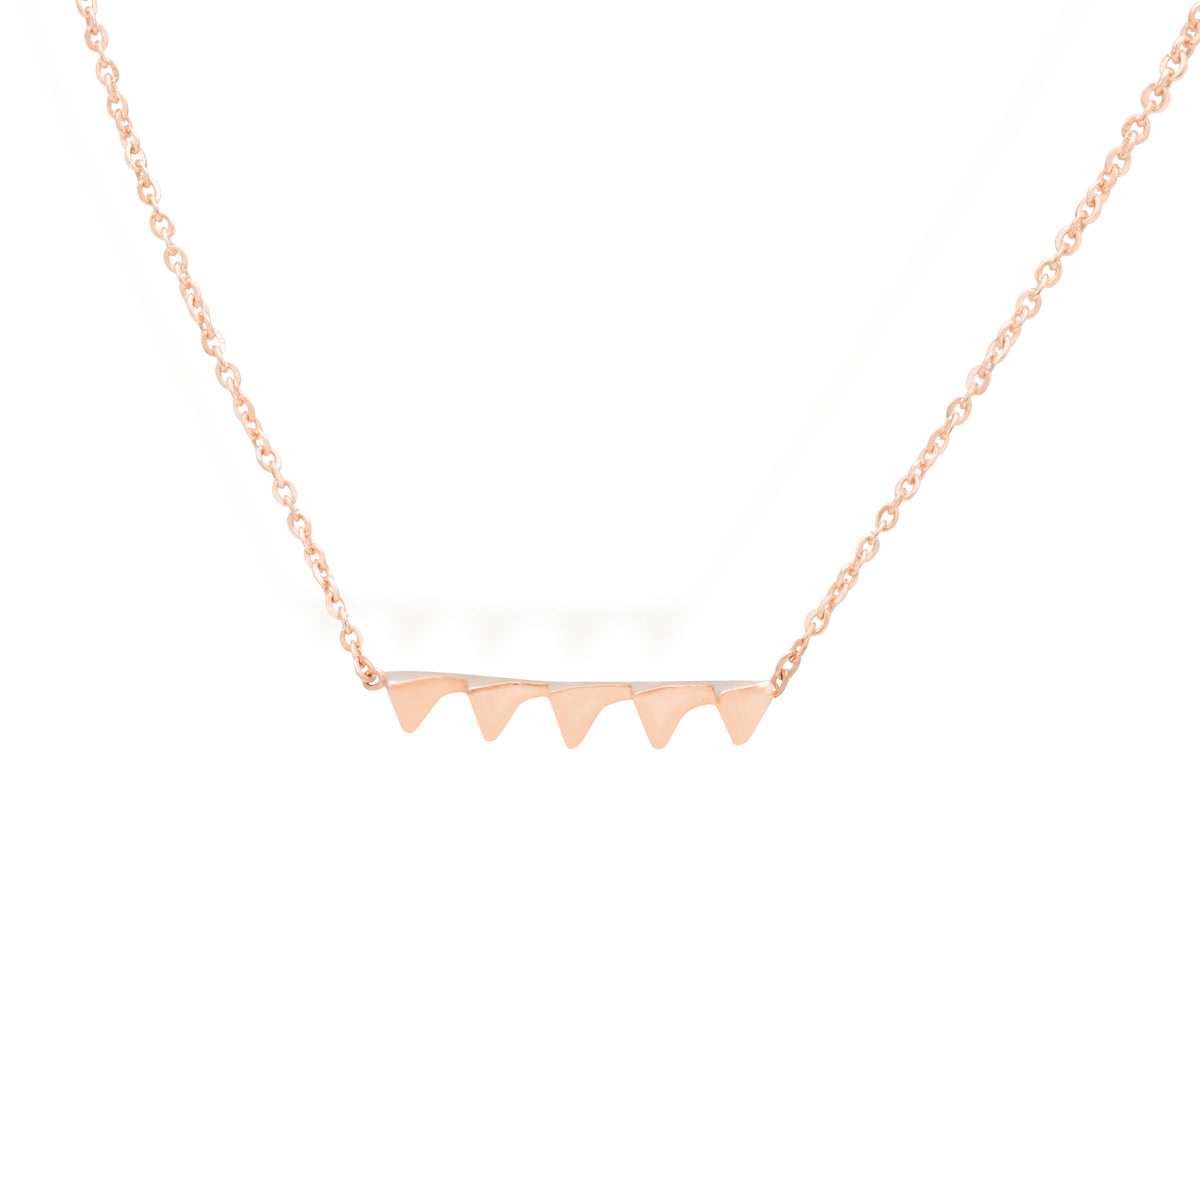 gold necklace for women in rose gold colour